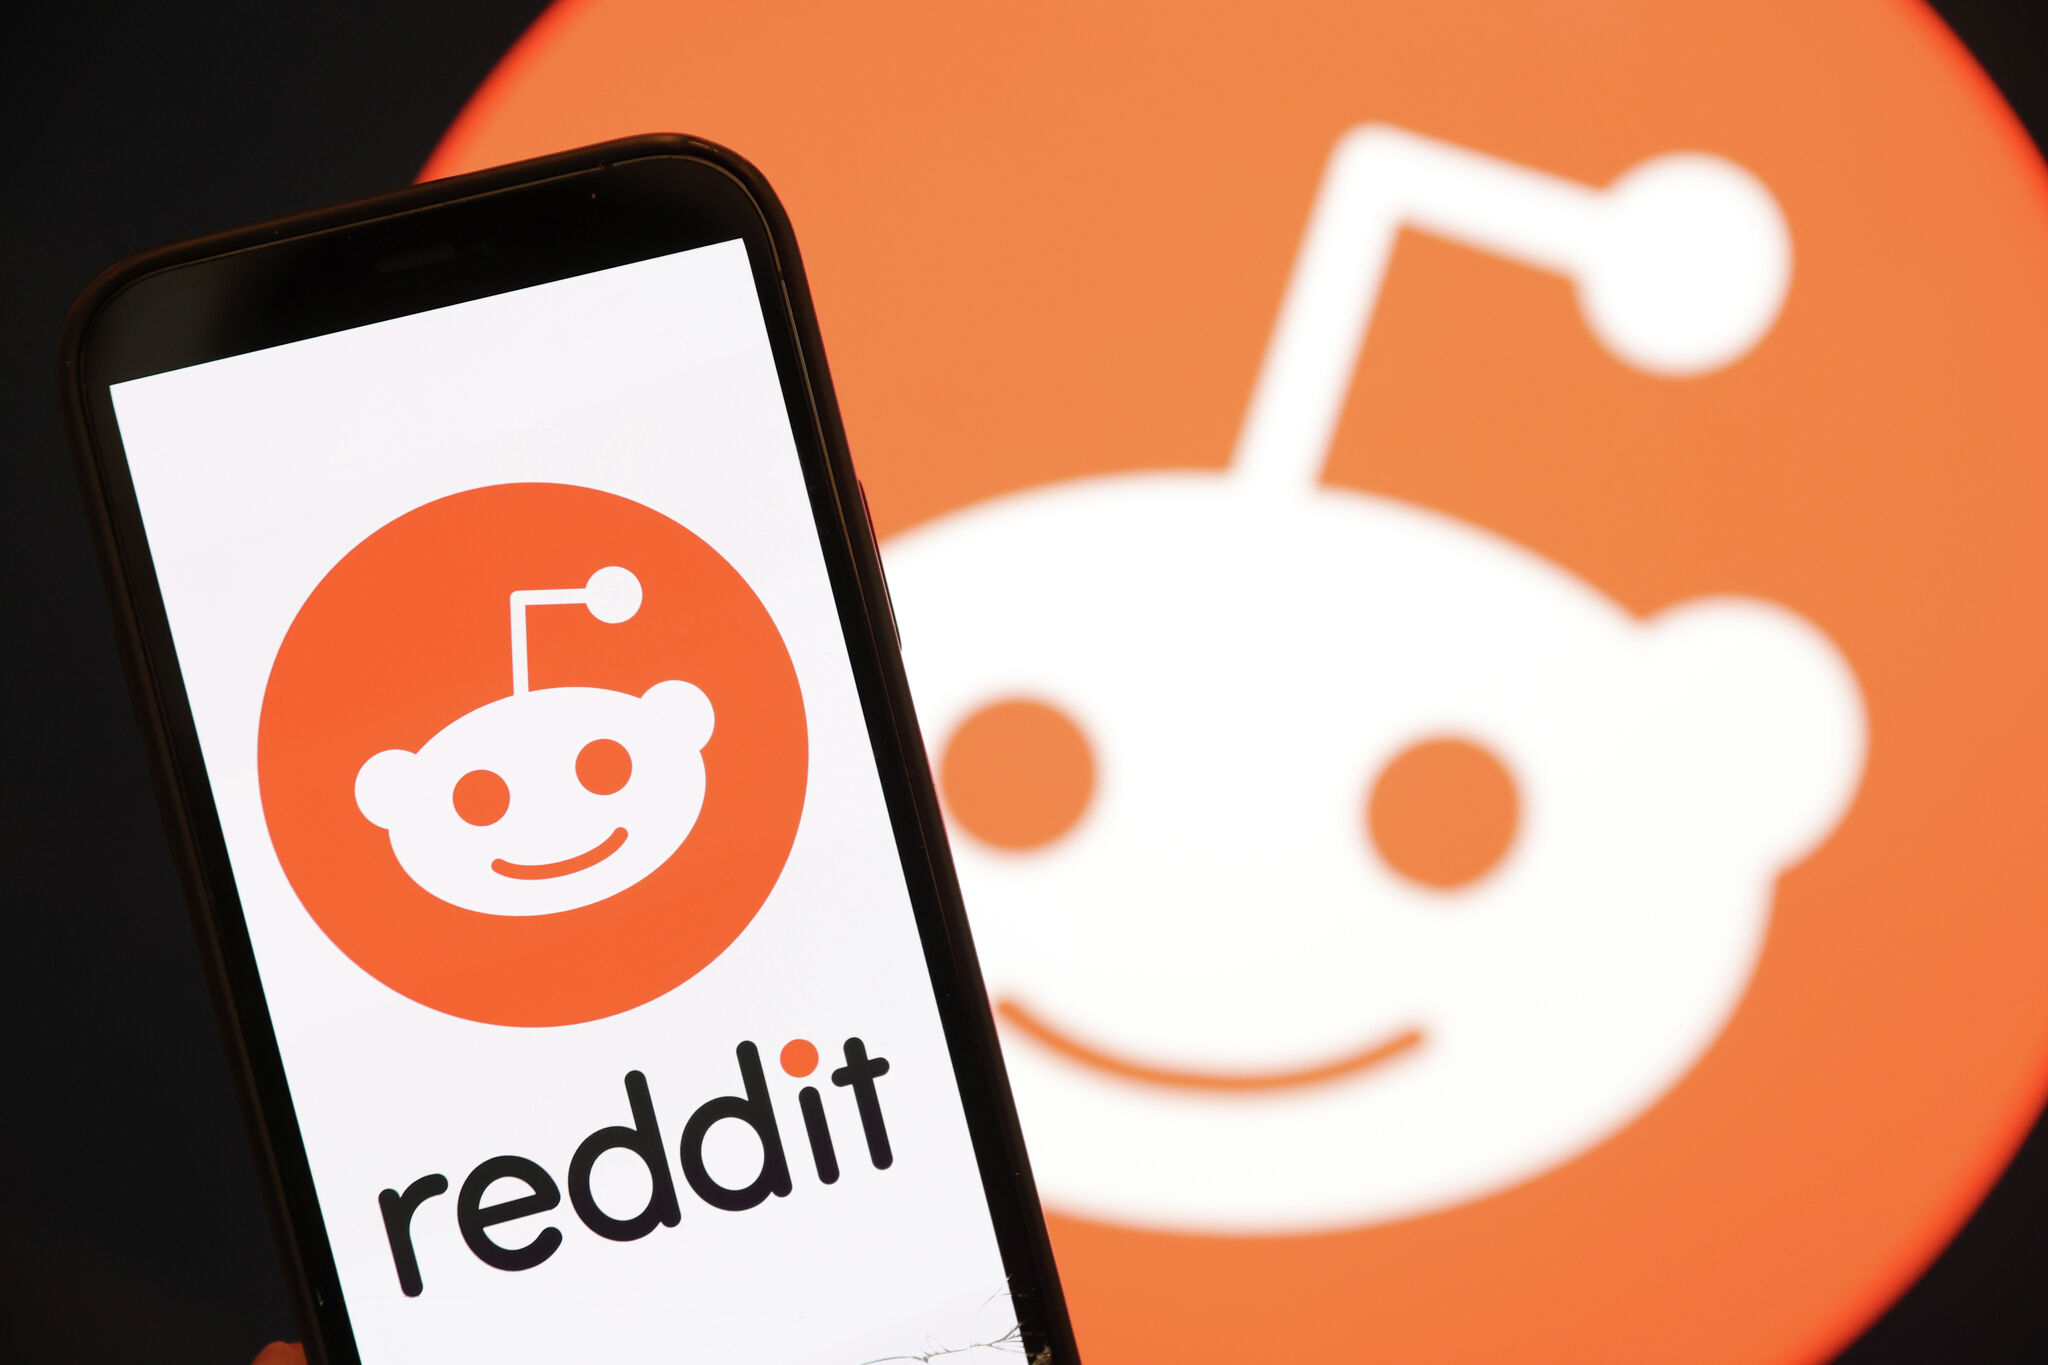 Reddit users keep up blackout protest after CEO's 'trivializing' memo